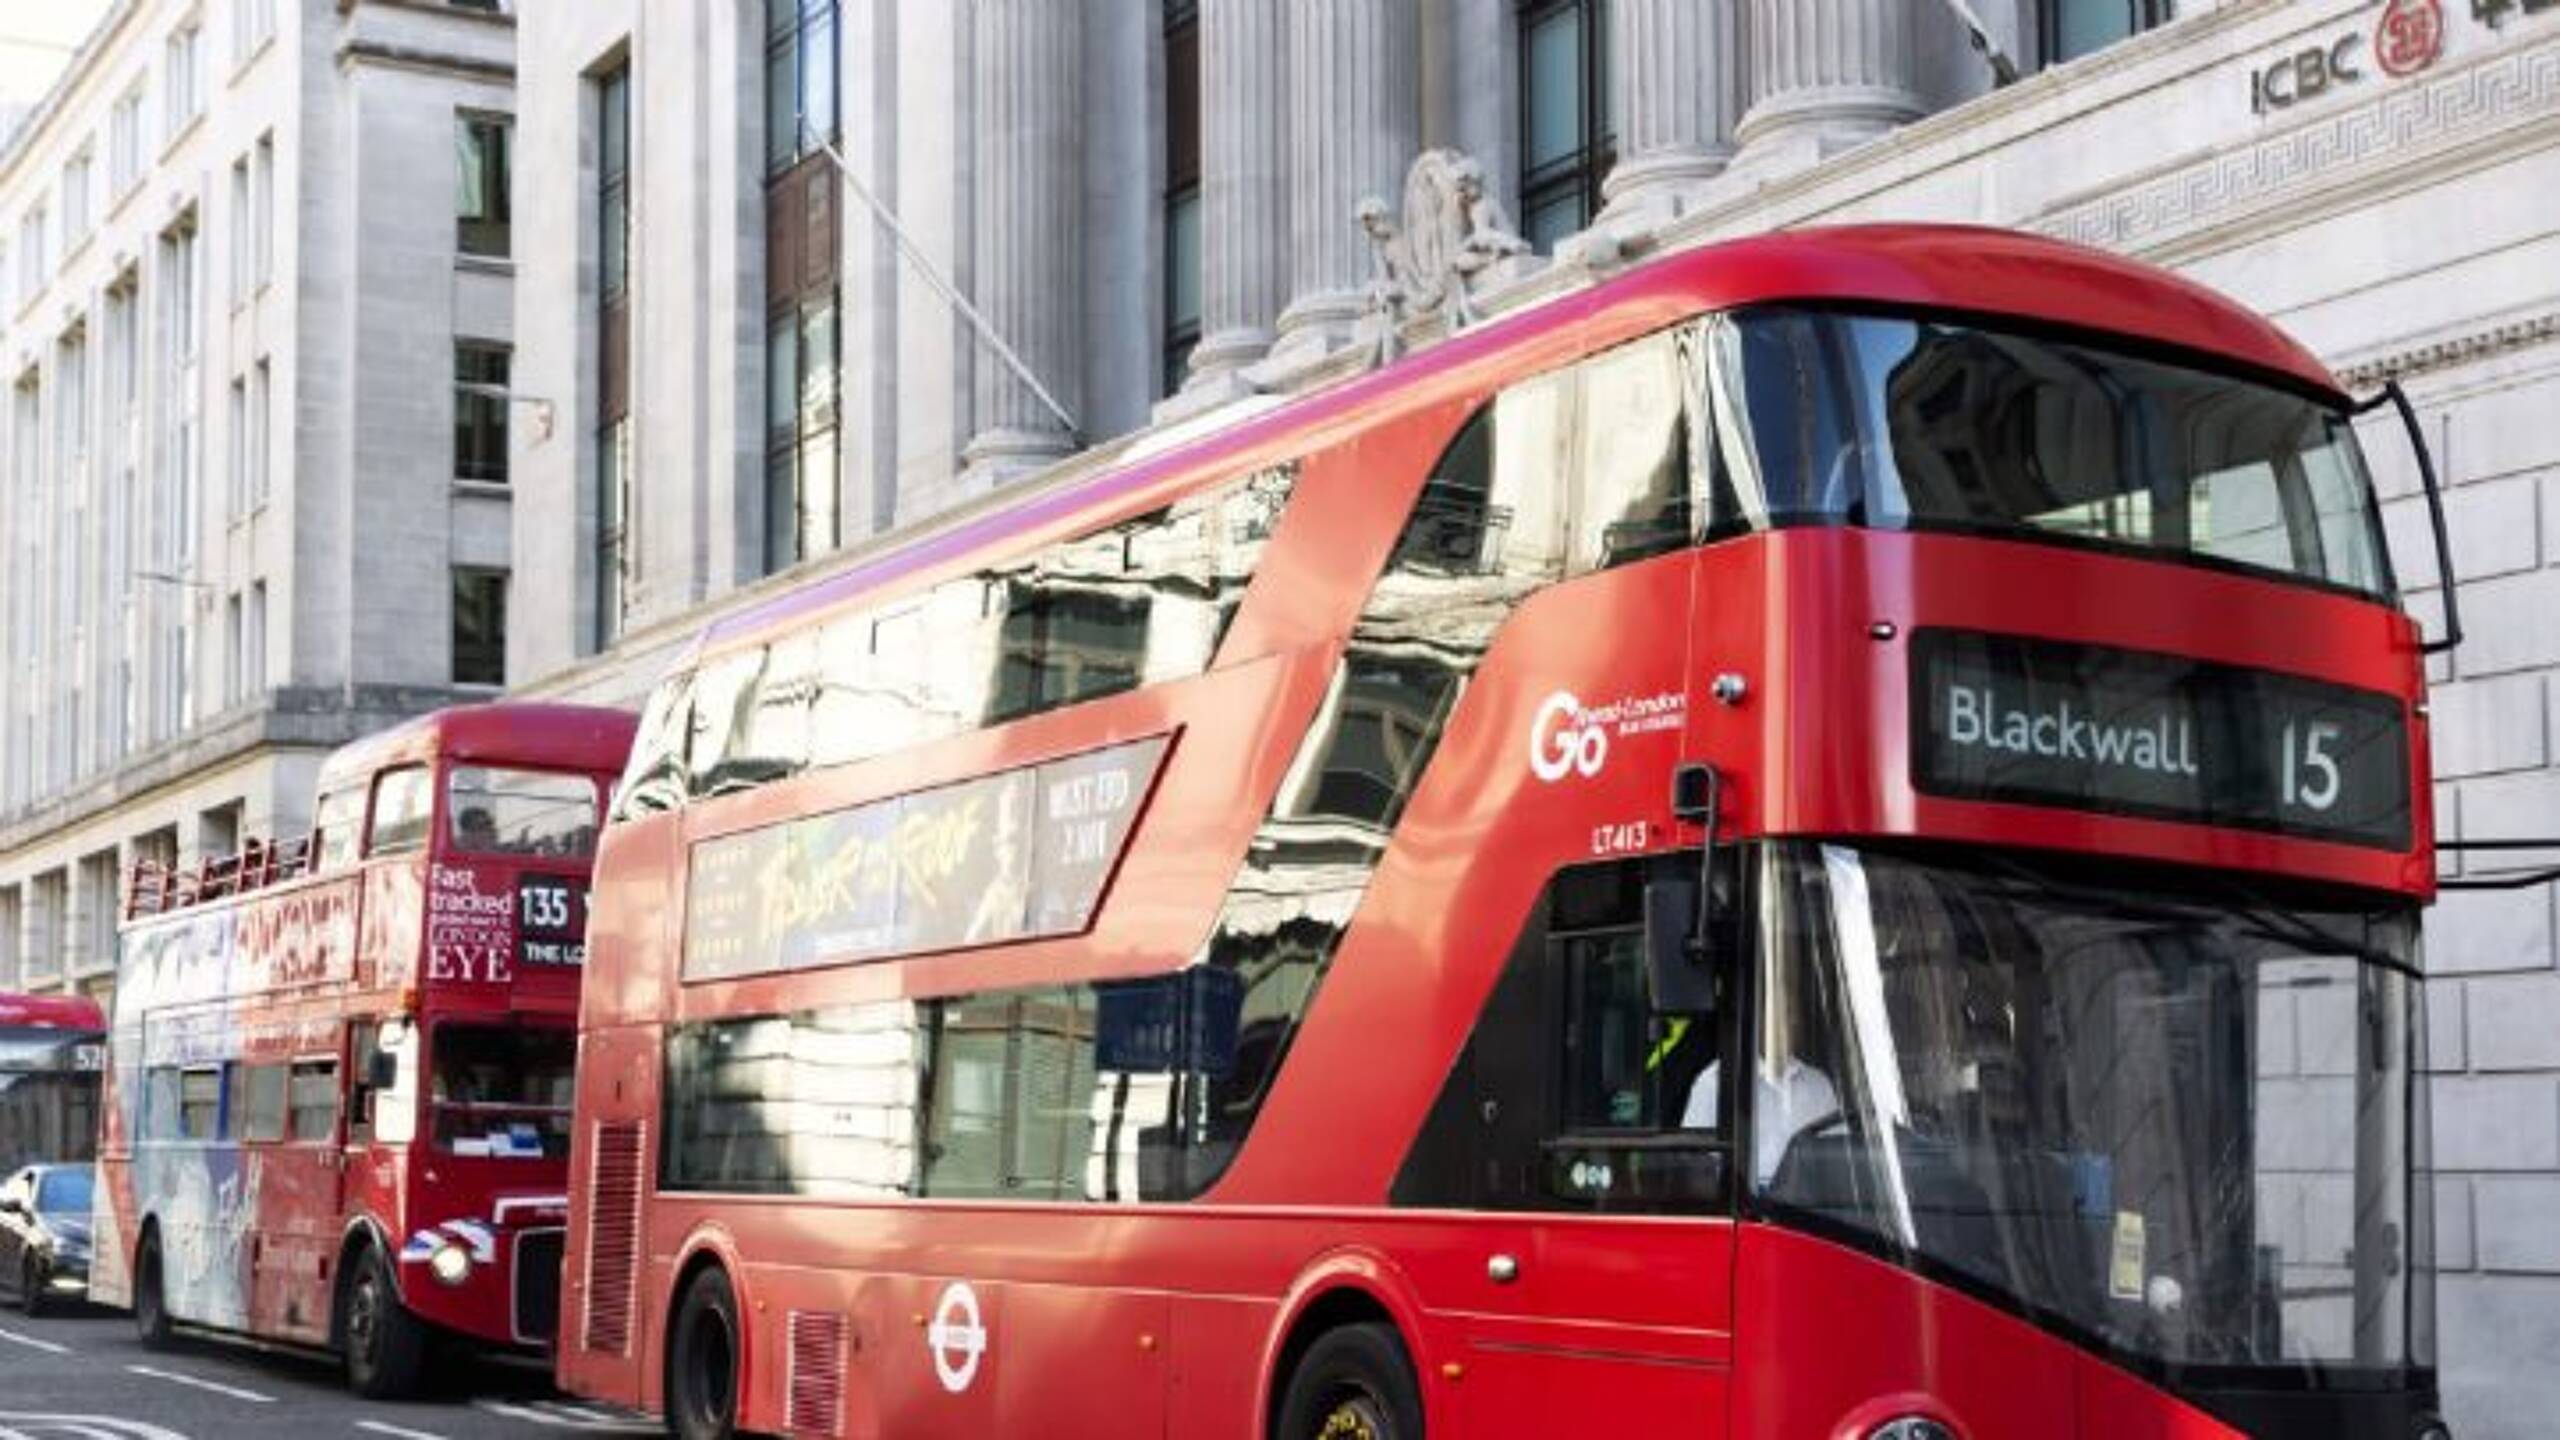 Public transport overhaul would deliver £52bn while supporting net-zero transition